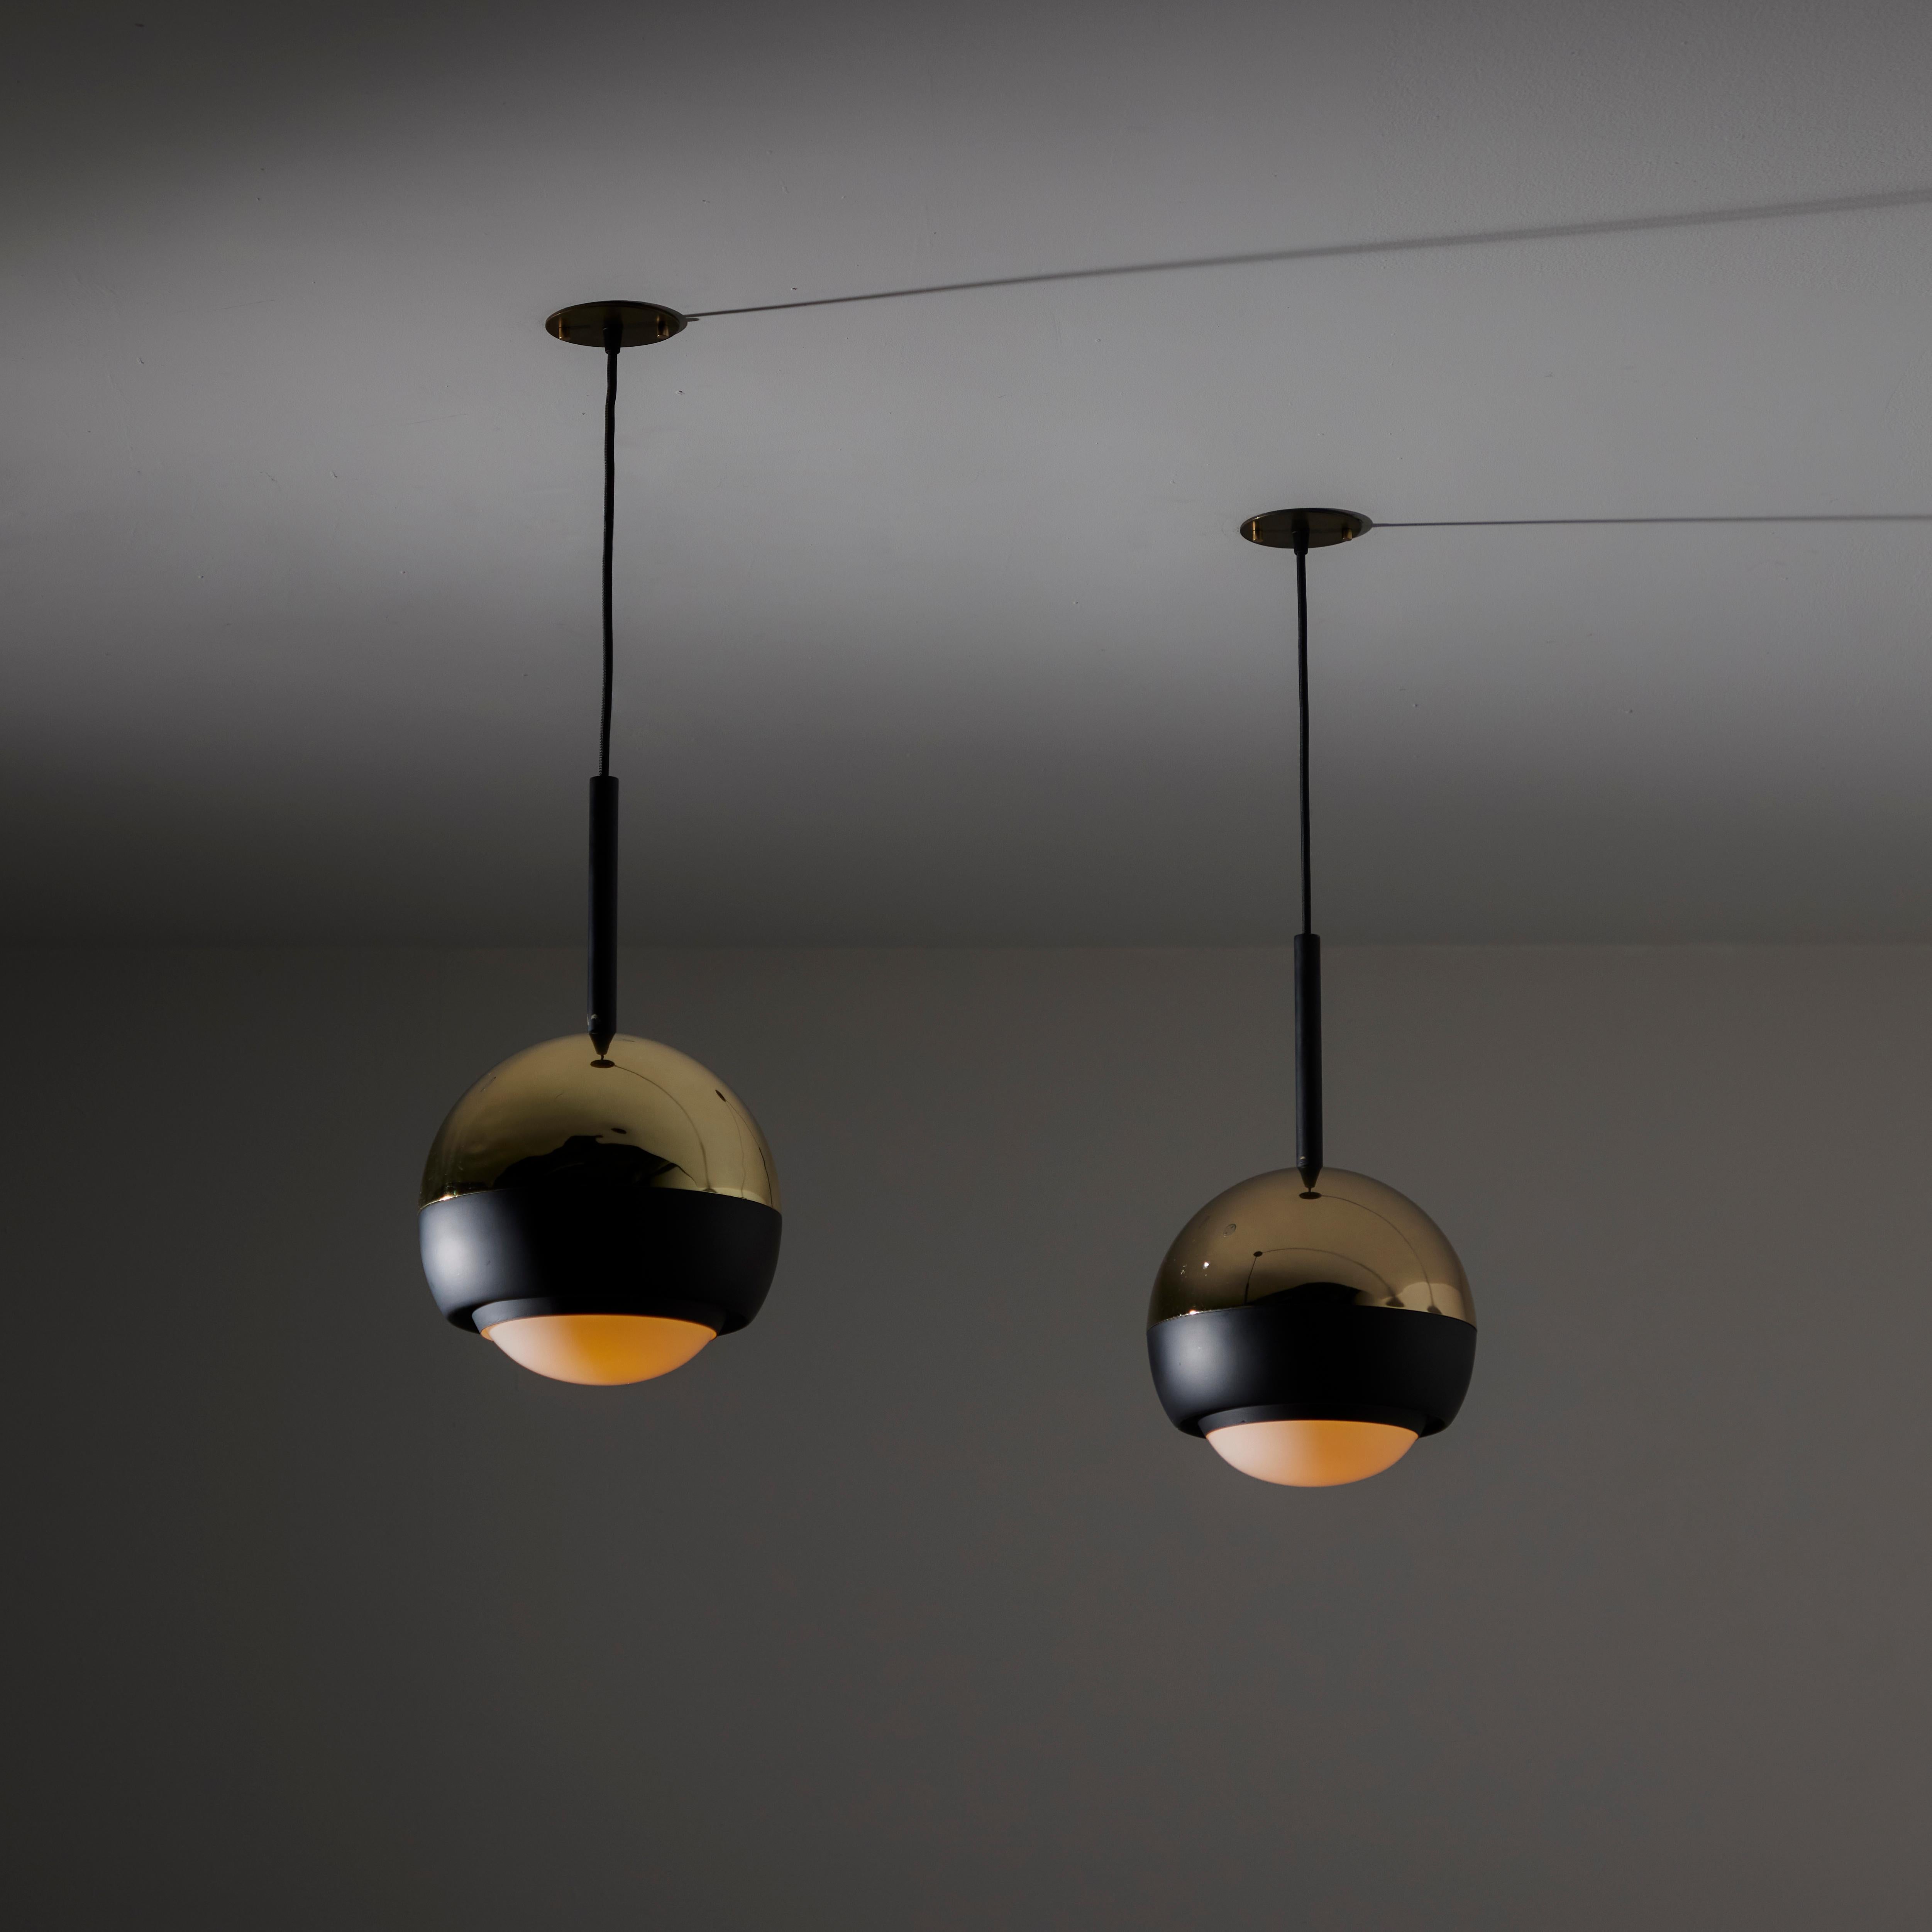 Ceiling Light by Stilnovo. Designed and manufactured in Italy, circa the 1960s. Original model 1230 pendants from Stilnovo. The glass diffusers have been replaced by opaline diffusers. The lamps comprise of black enameled coating and polished brass.